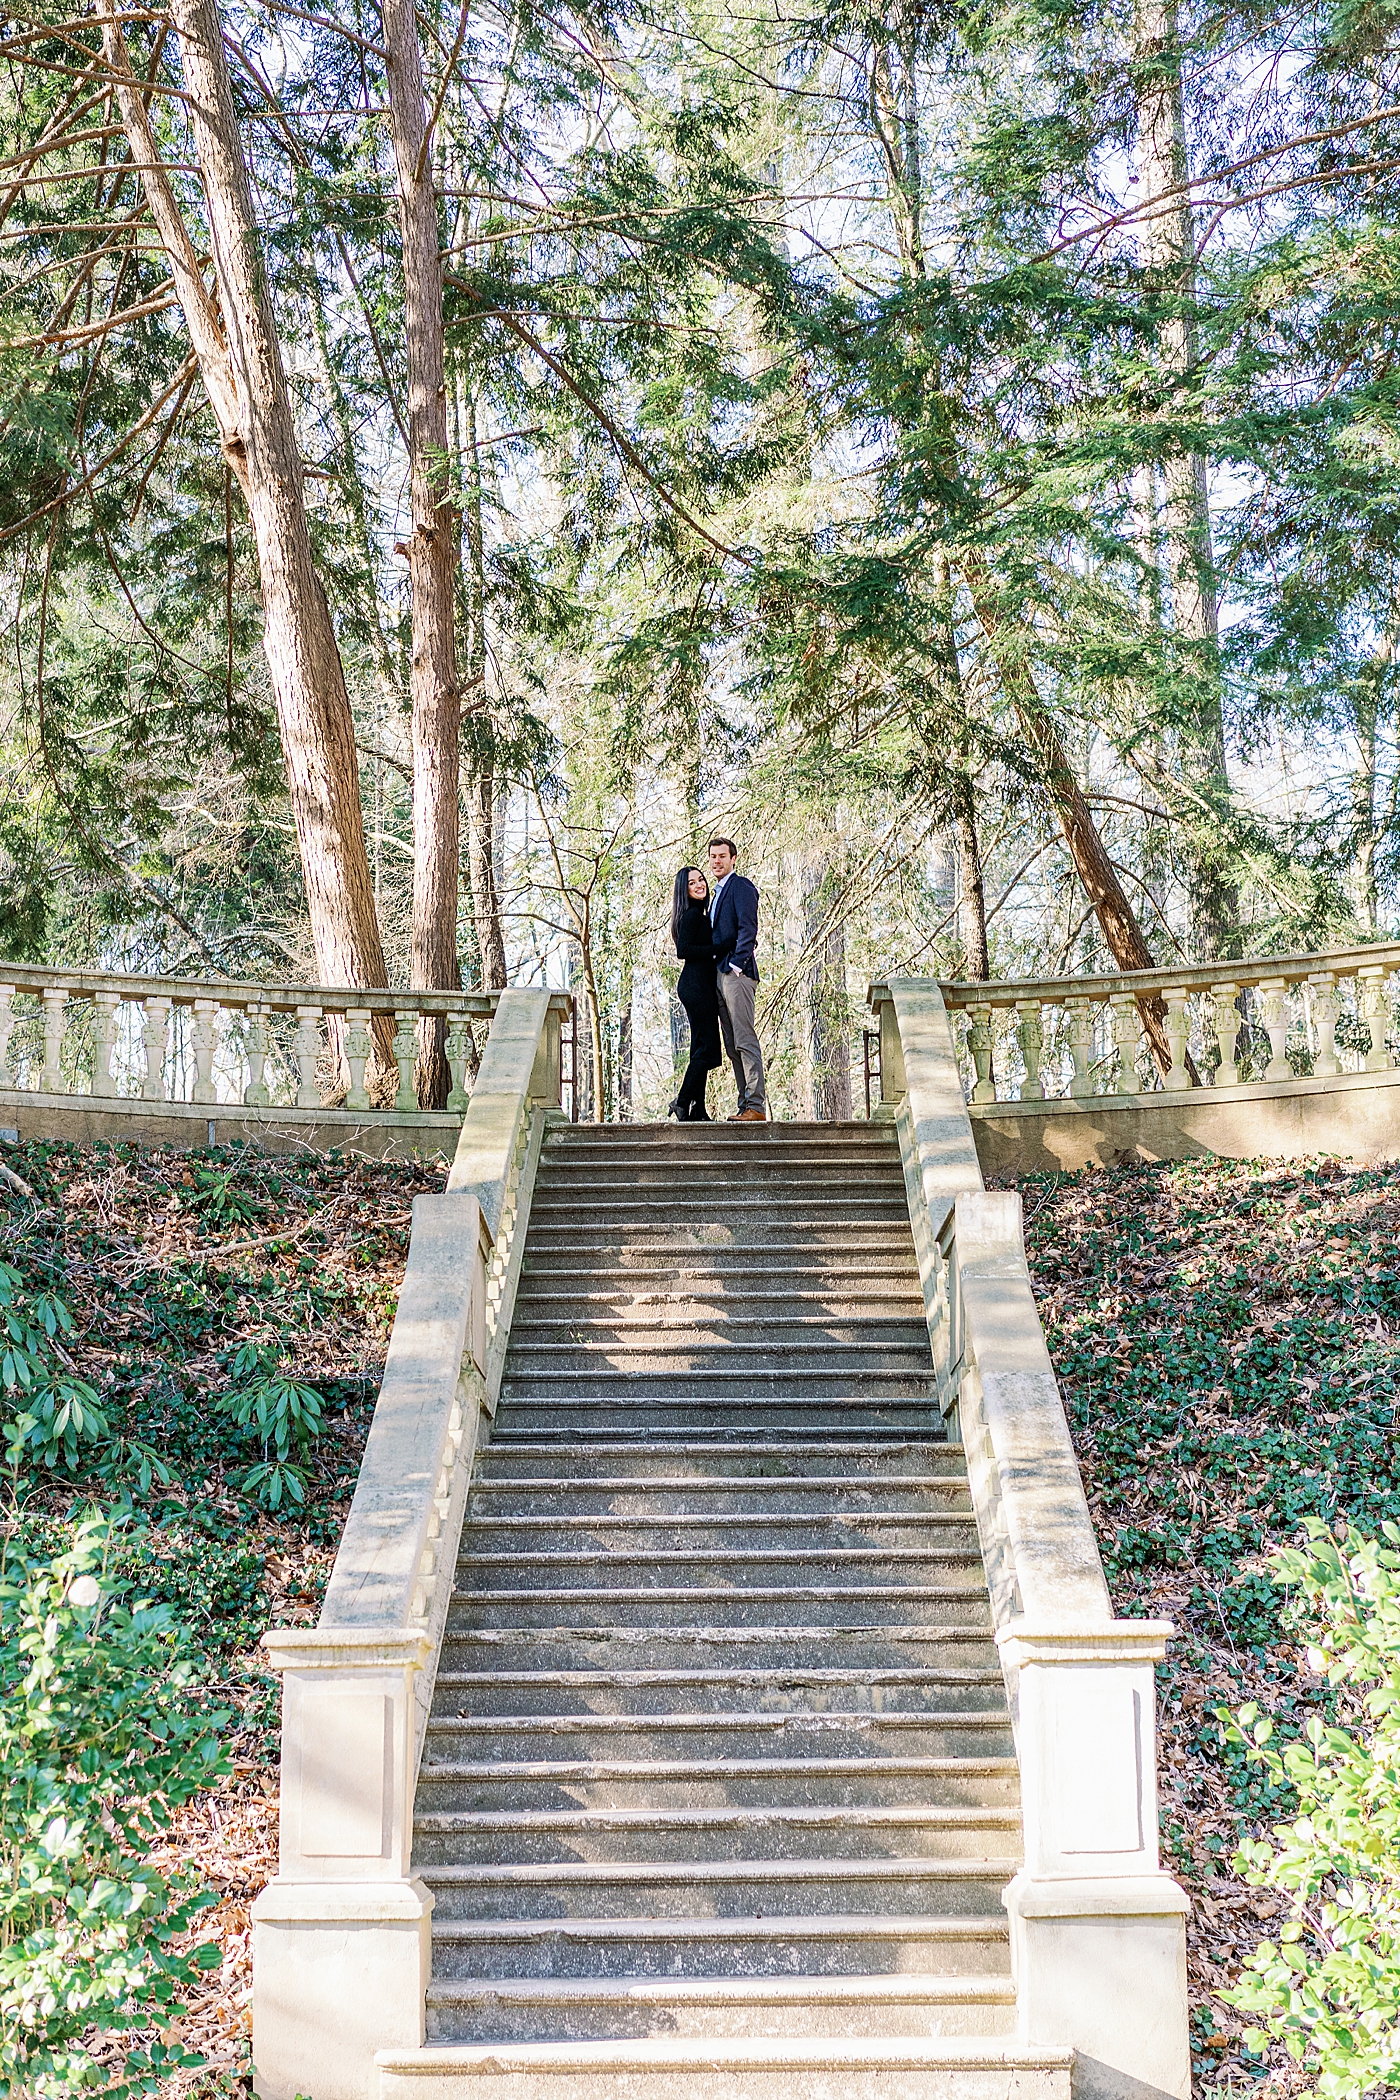 Couple in blue and black at the top of stone staircase | Image by Annie Laura Photo